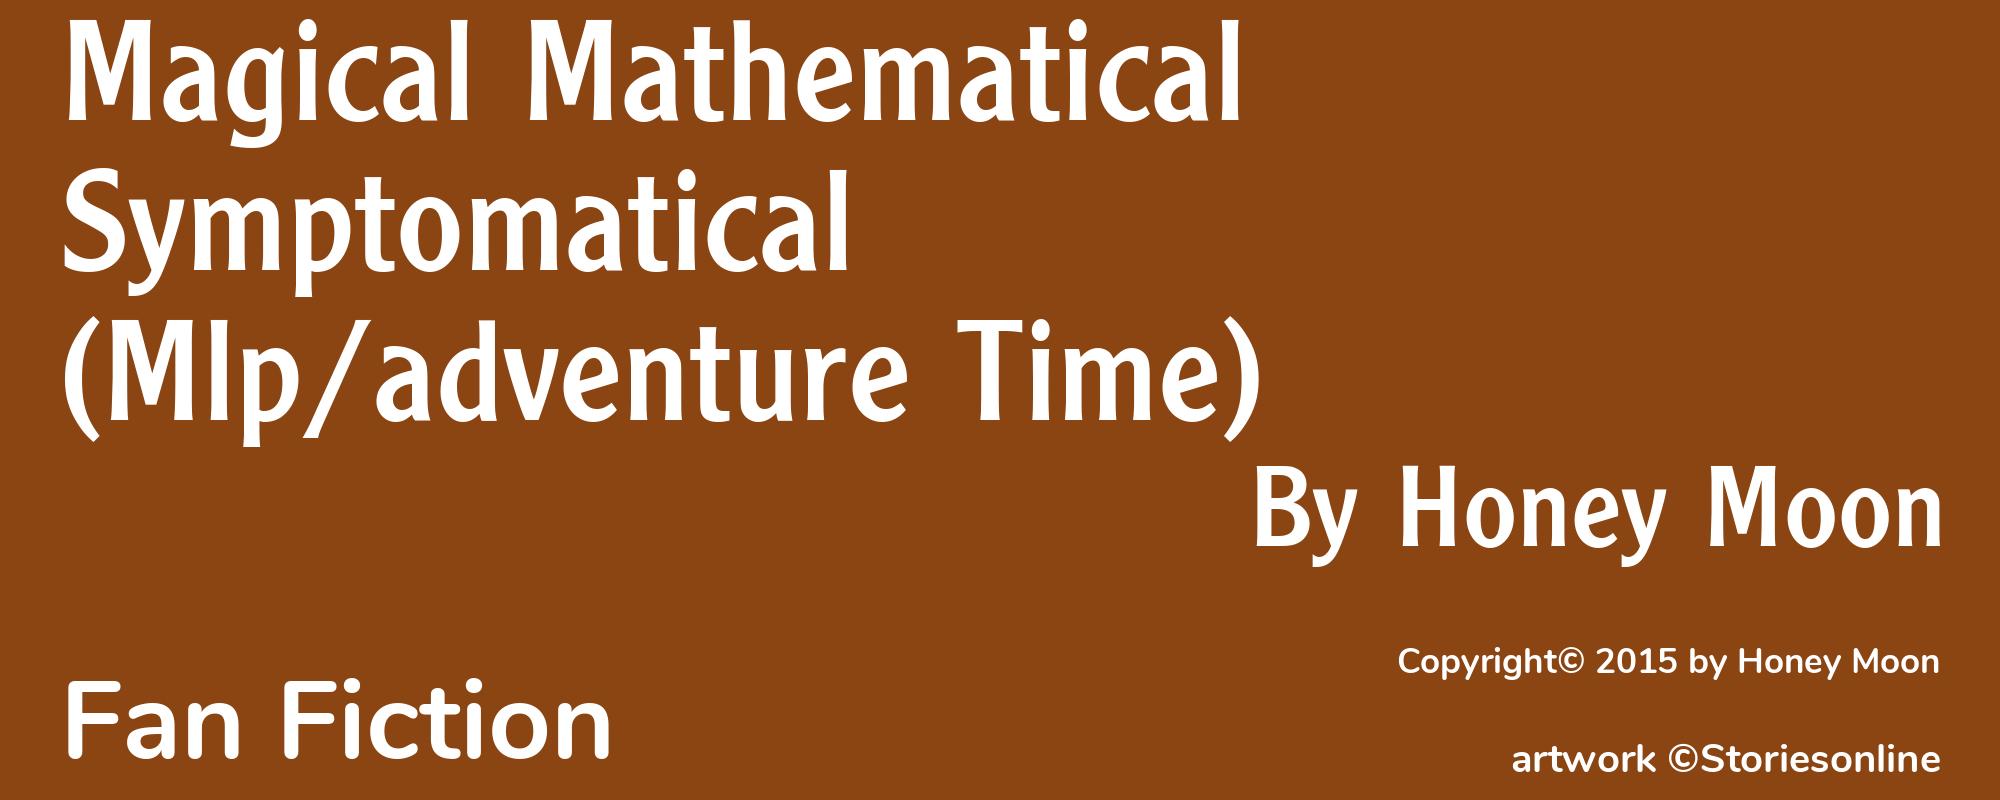 Magical Mathematical Symptomatical (Mlp/adventure Time) - Cover